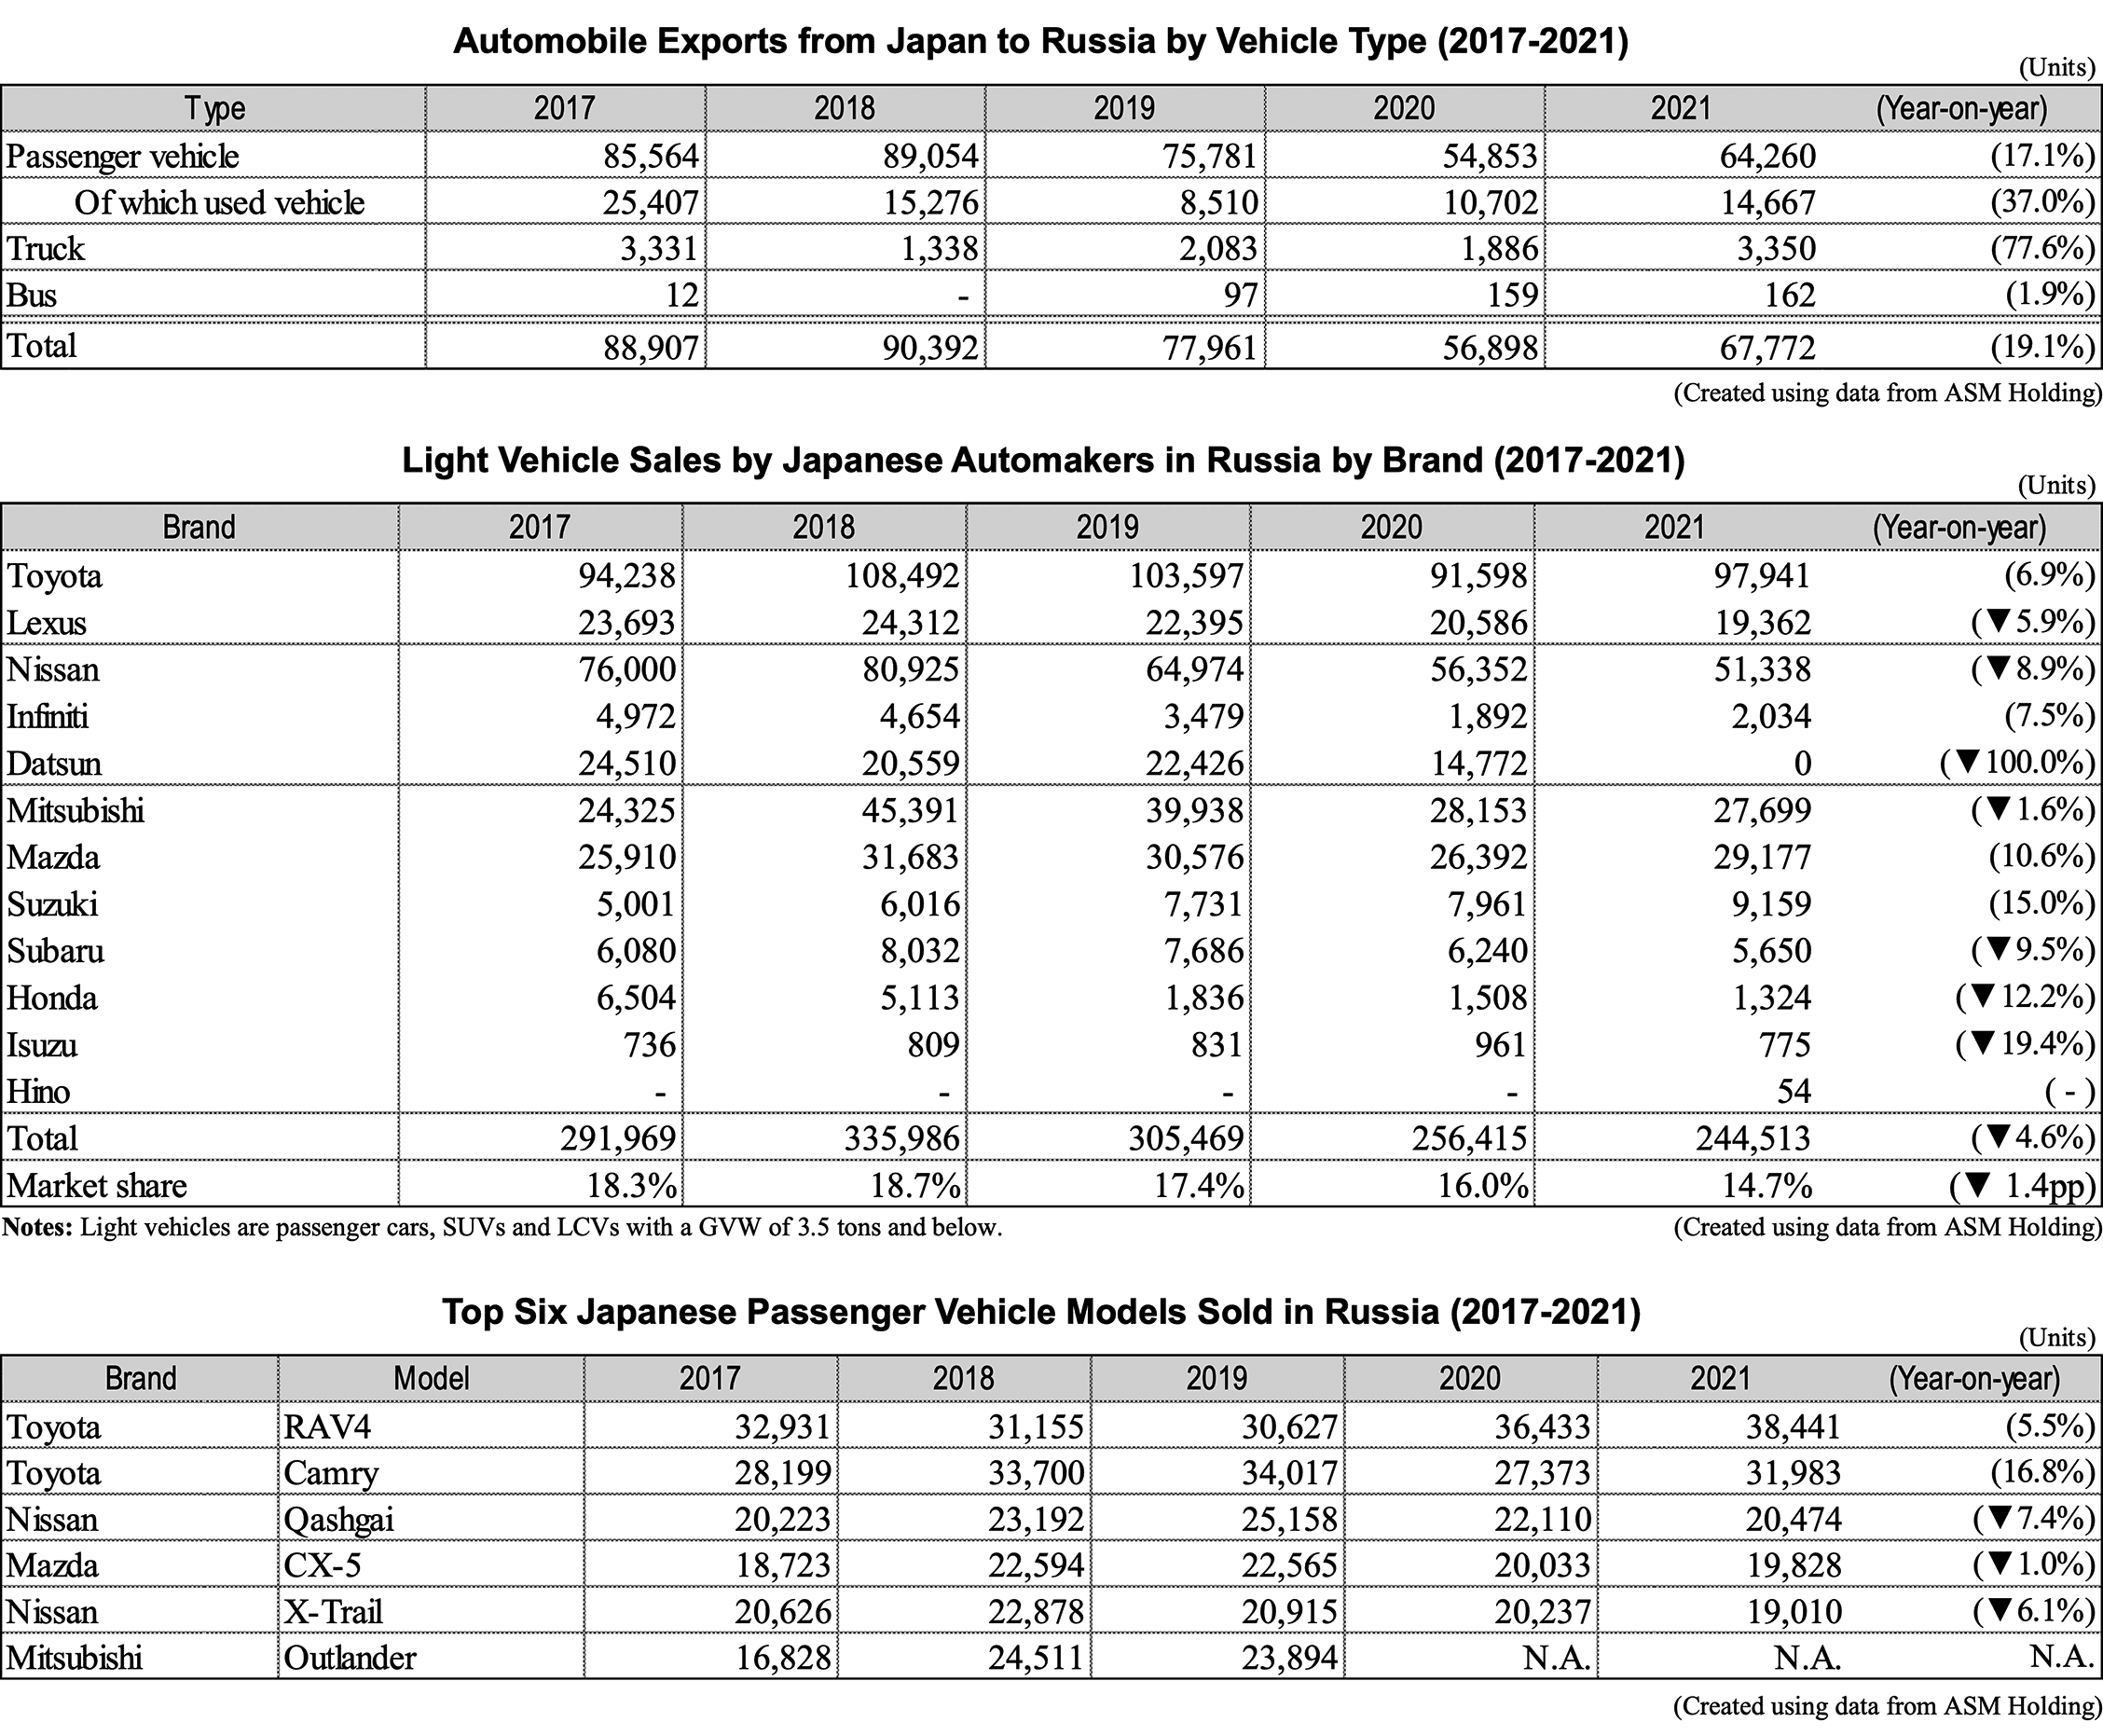 Table 1: Automobile Exports from Japan to Russia by Vehicle Type (2017-2021) | Table 2: Light Vehicle Sales by Japanese Automakers in Russia by Brand (2017-2021) | Table 3: Top Six Japanese Passenger Vehicle Models Sold in Russia (2017-2021)